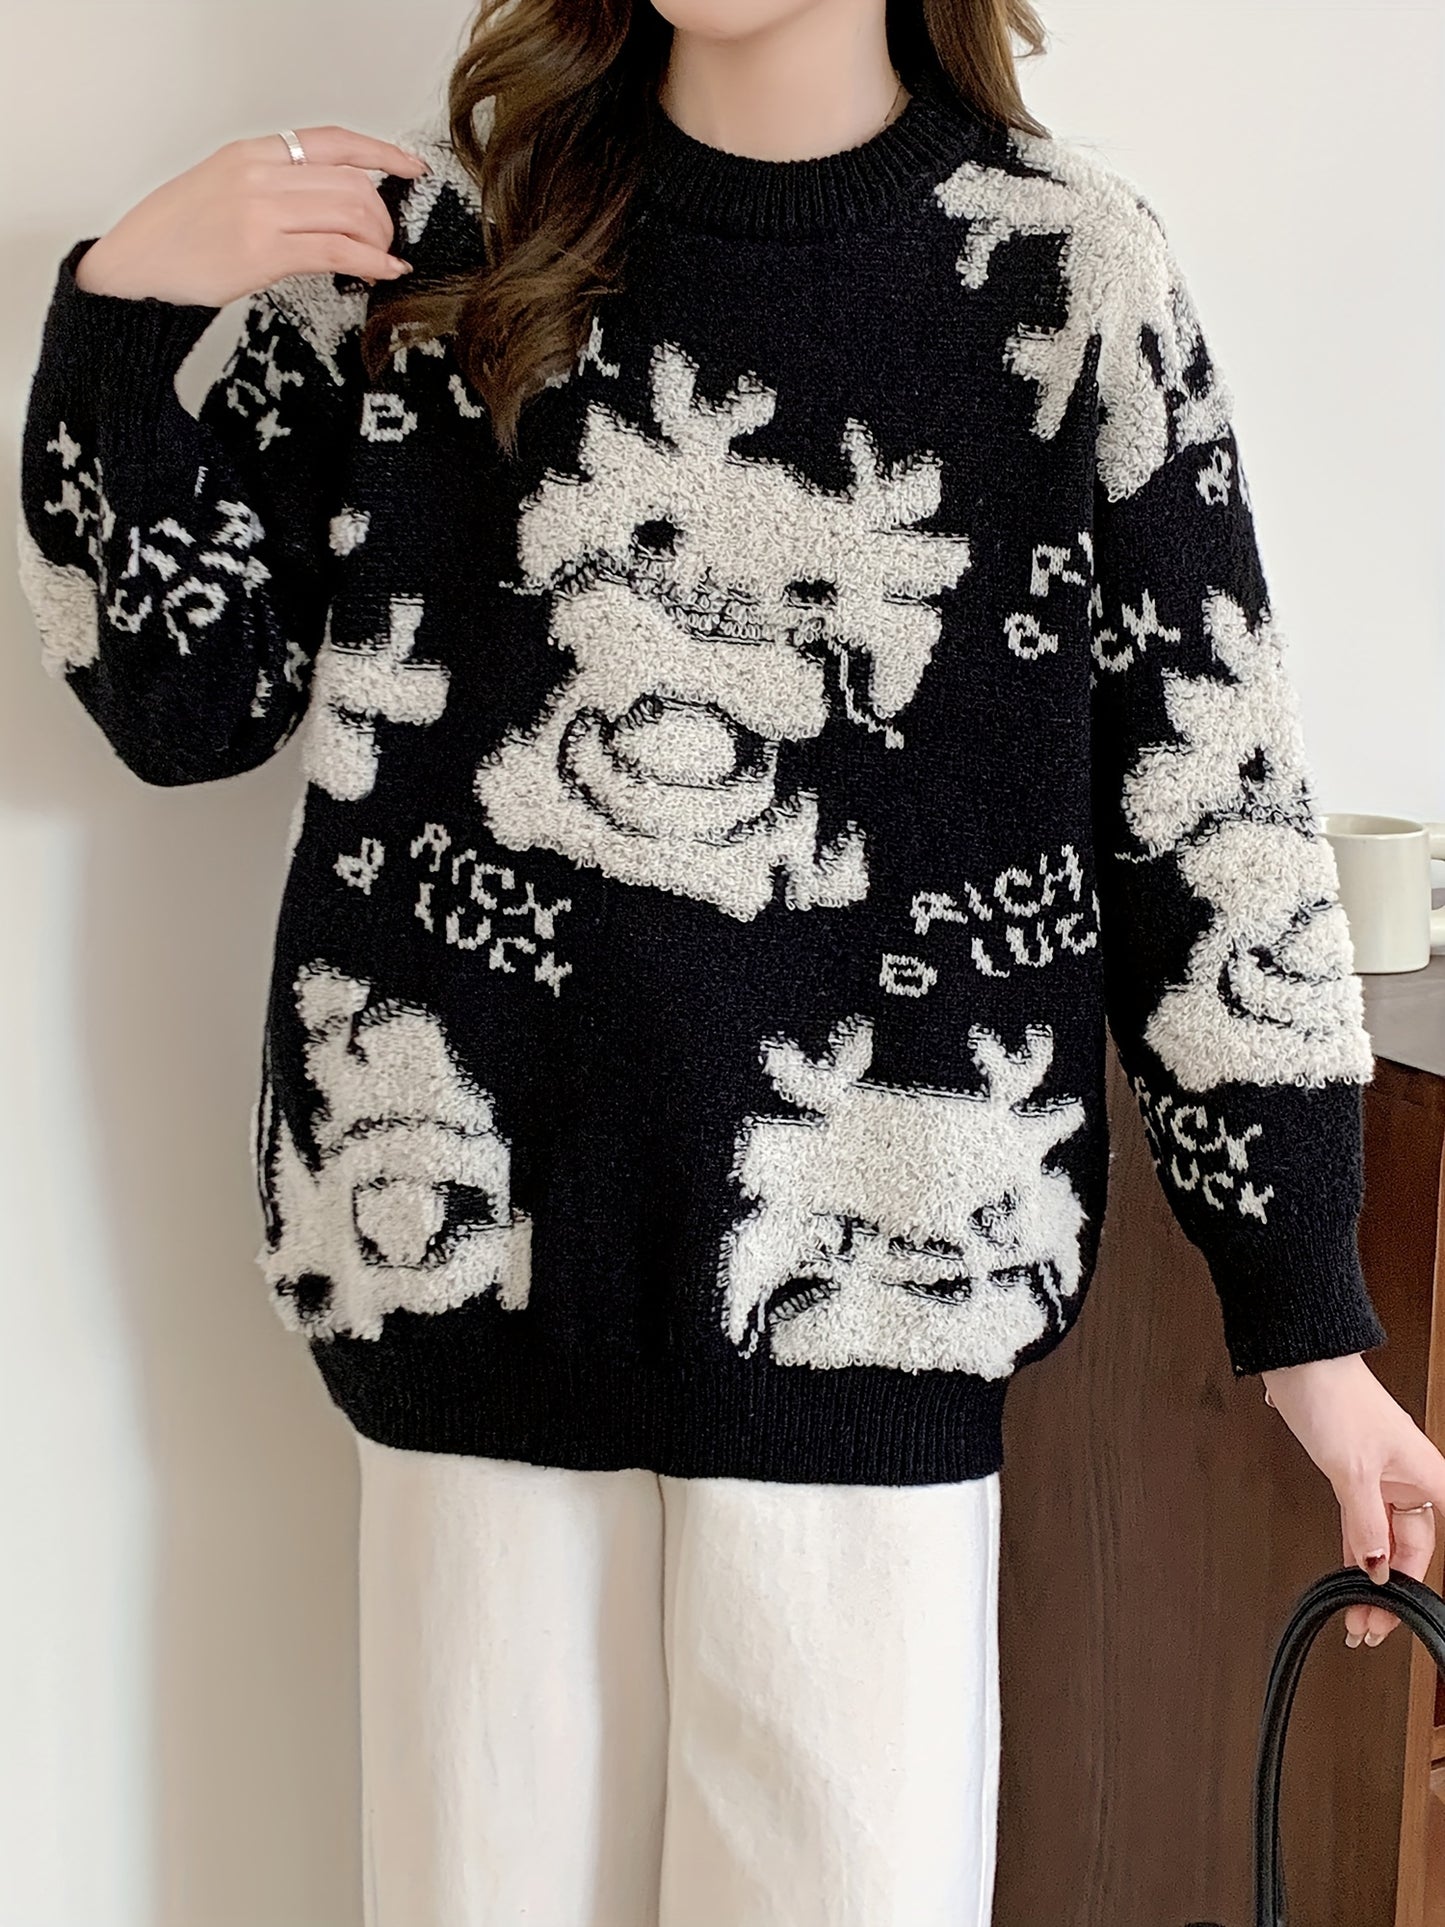 Antmvs Dragon Pattern Crew Neck Pullover Sweater, Cute Long Sleeve Fall Winter Sweater, Women's Clothing